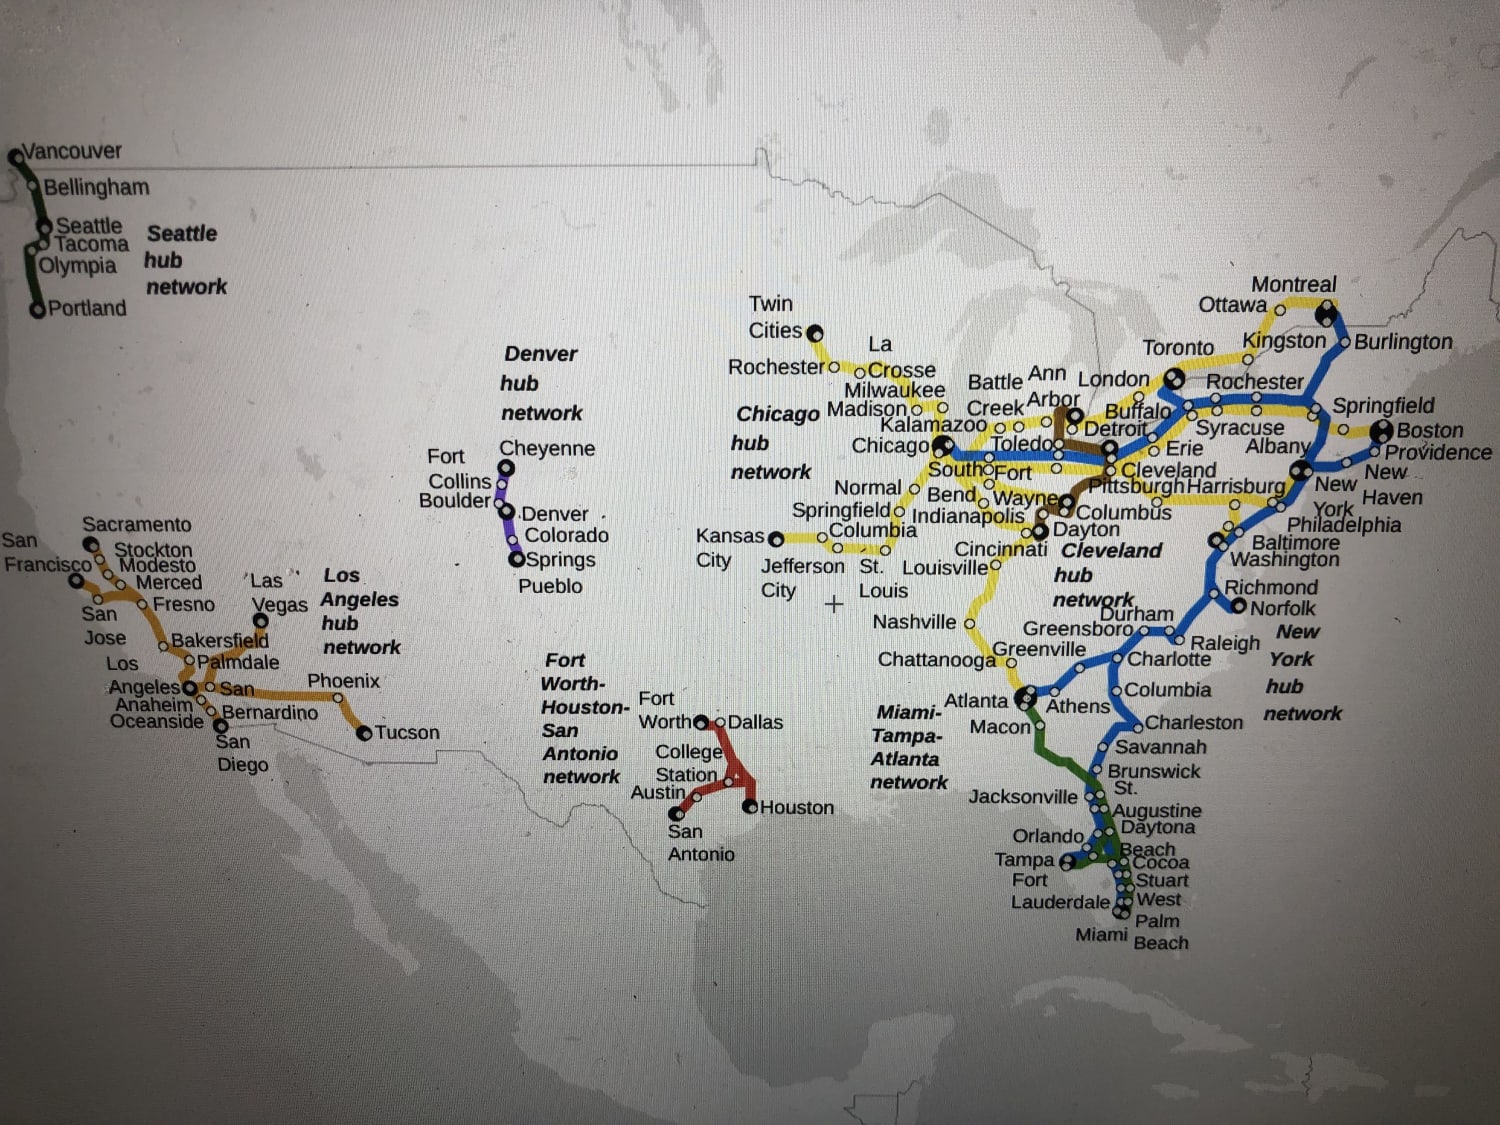 My idea for what a Shinkansen/TGV style high speed rail system could look like in the US. Black dots denote terminus stations. I originally posted this on another community but have since added a couple of updates based on comment feedback.